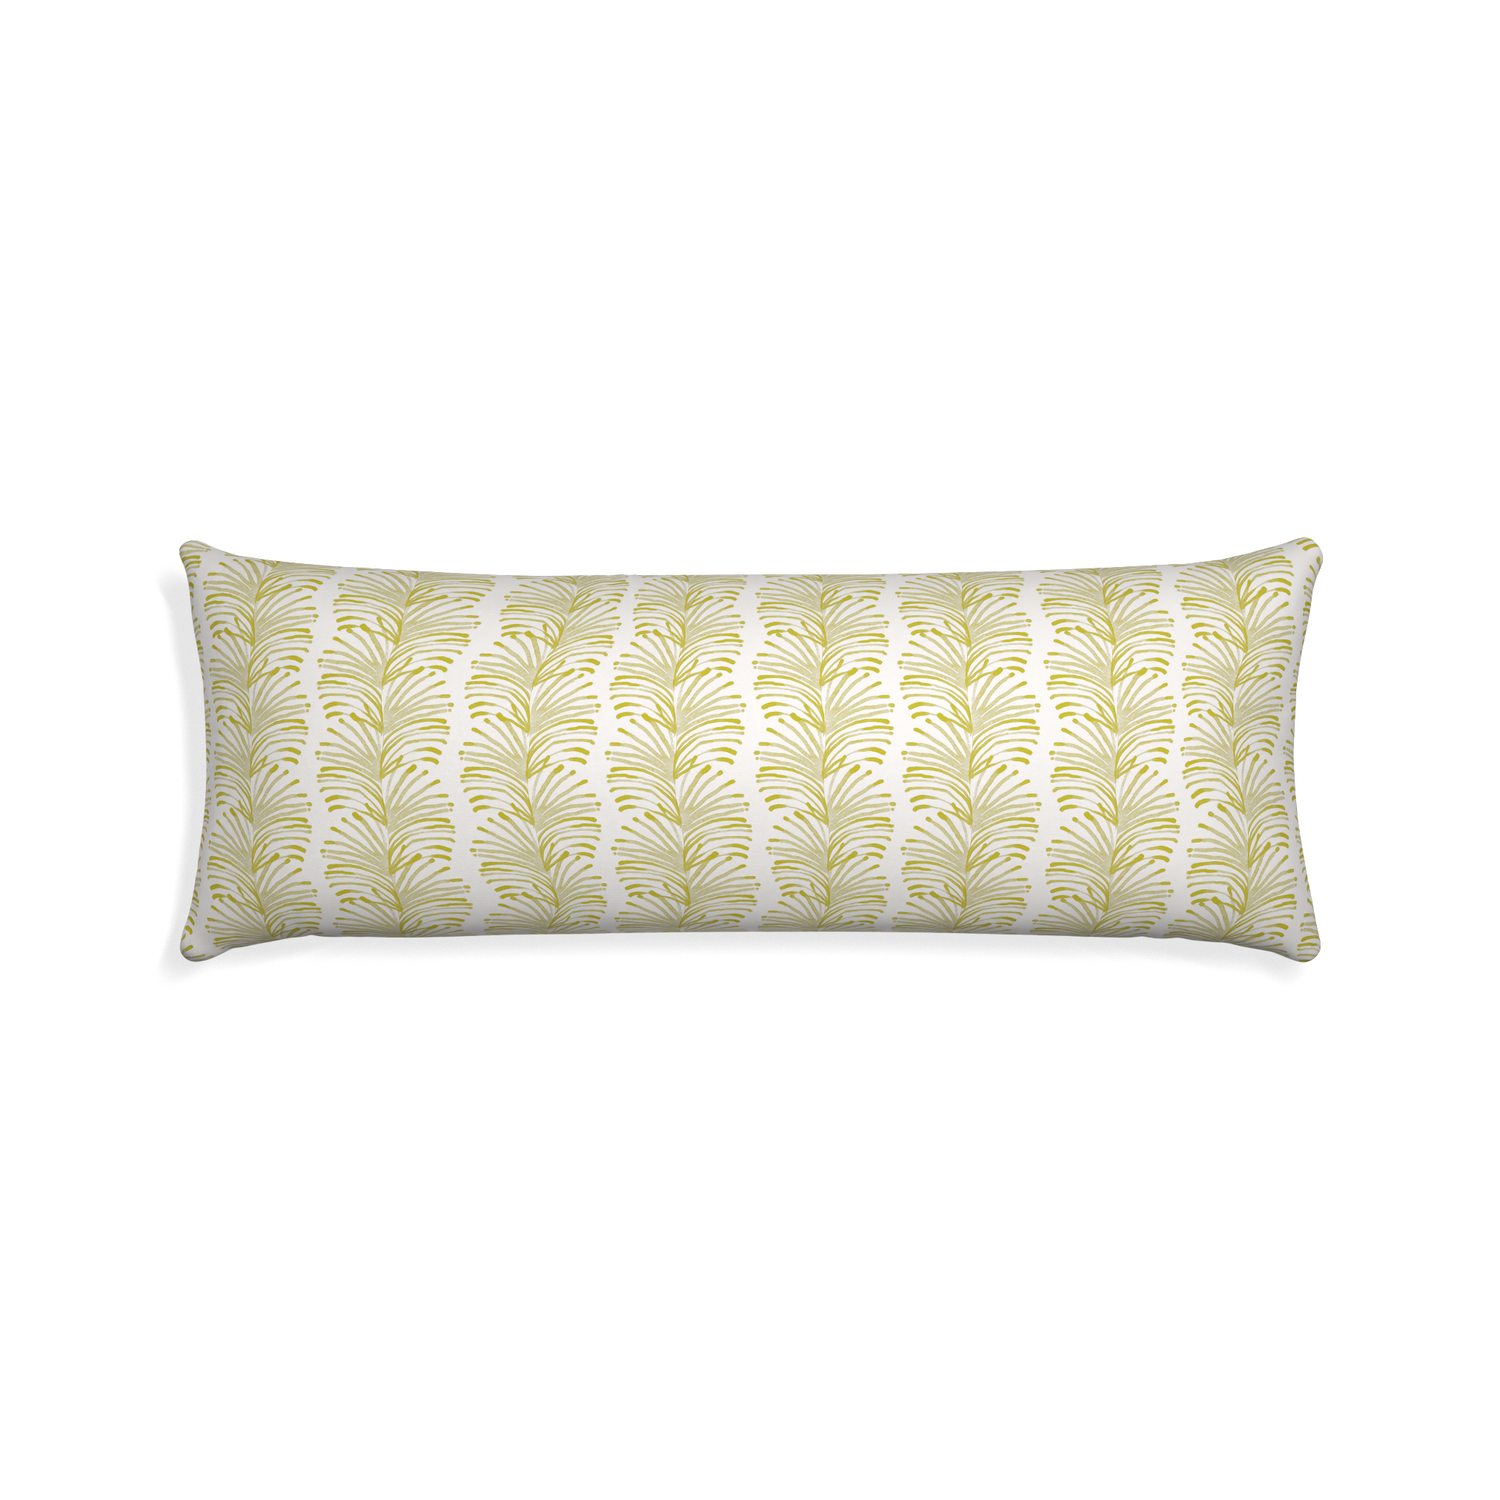 Xl-lumbar emma chartreuse custom pillow with none on white background